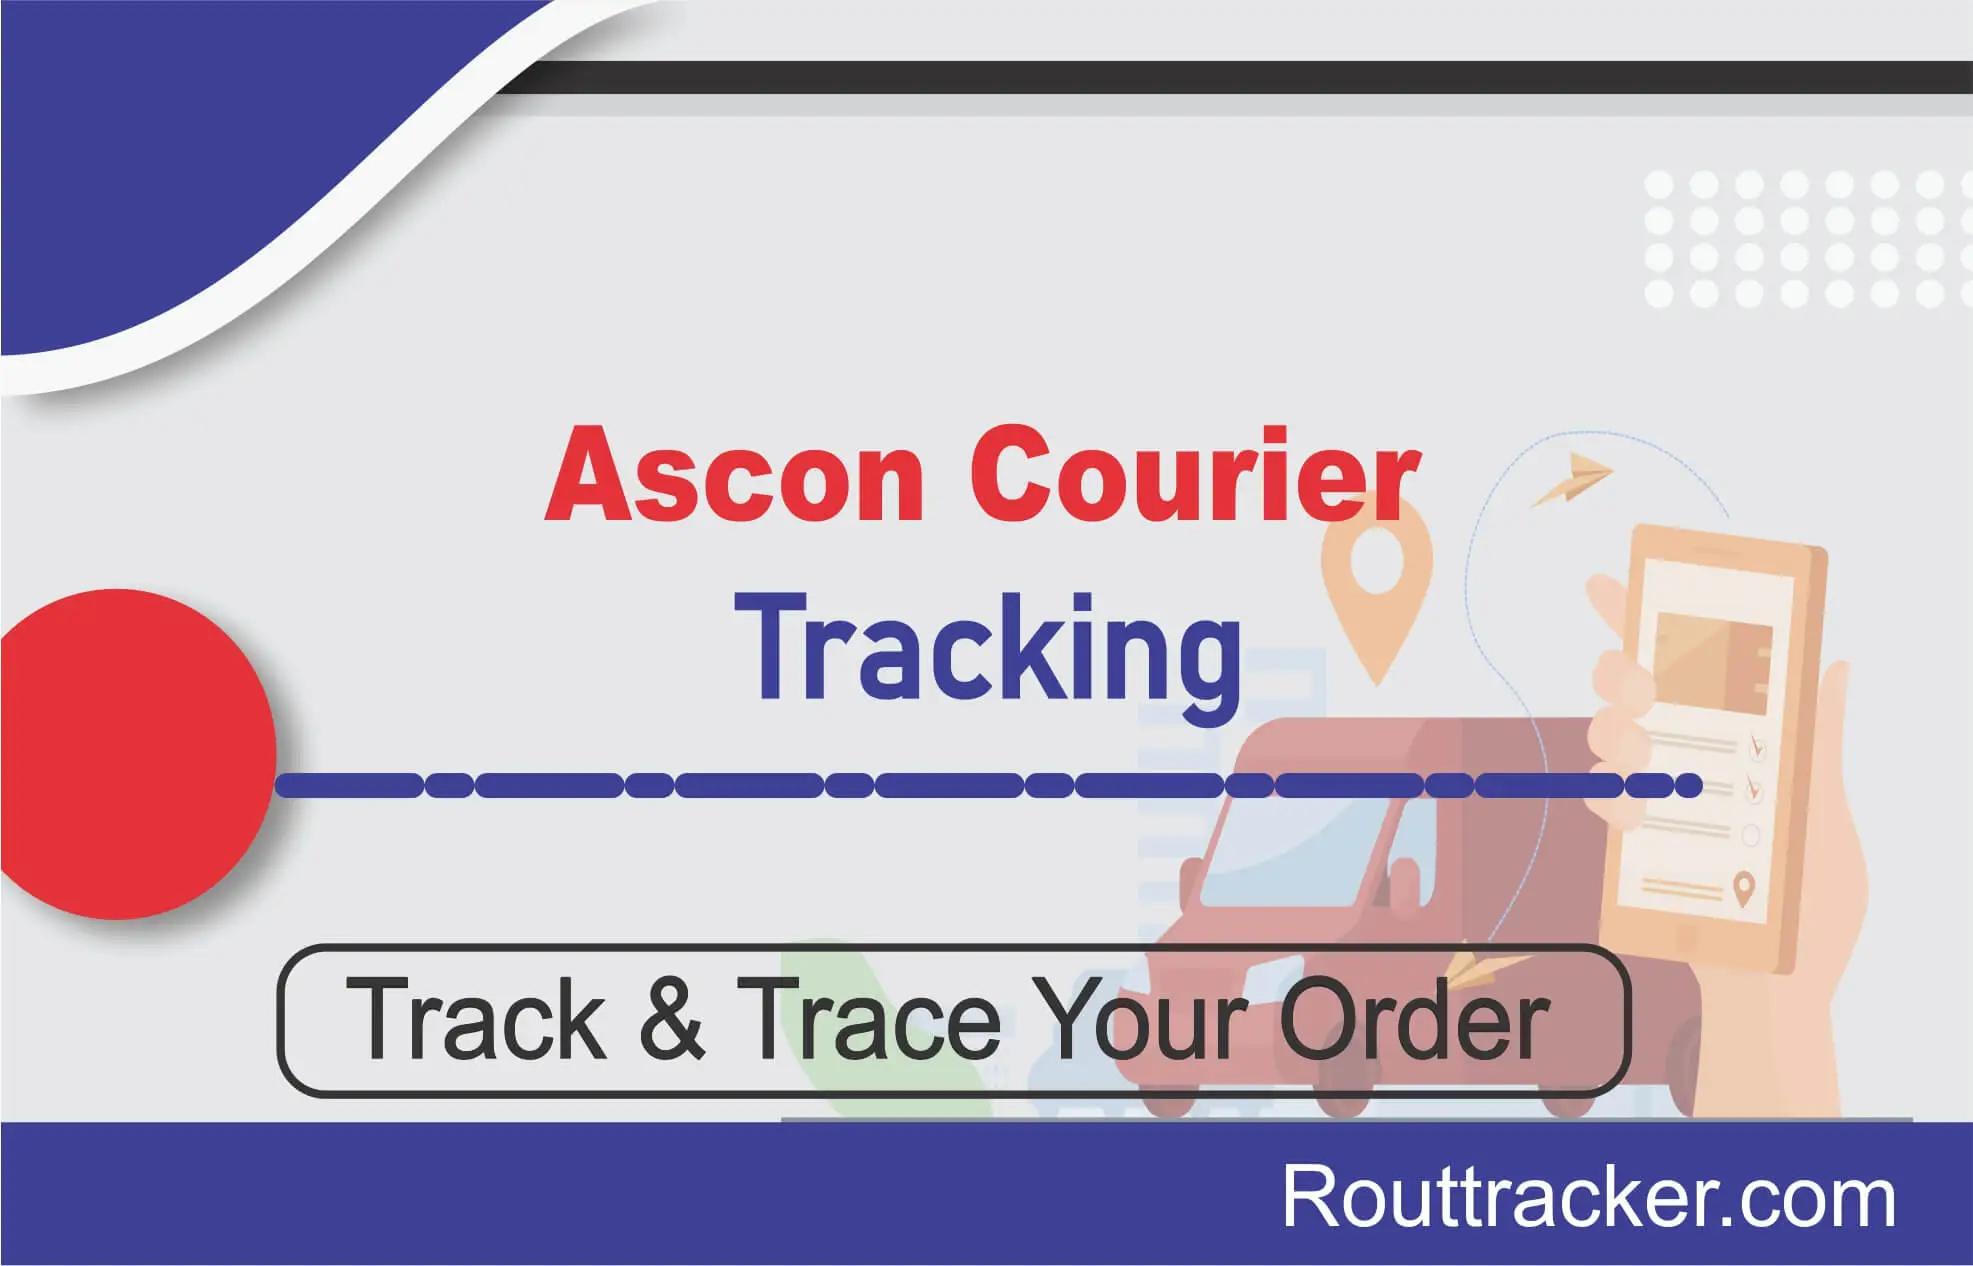 Ascon Courier Tracking